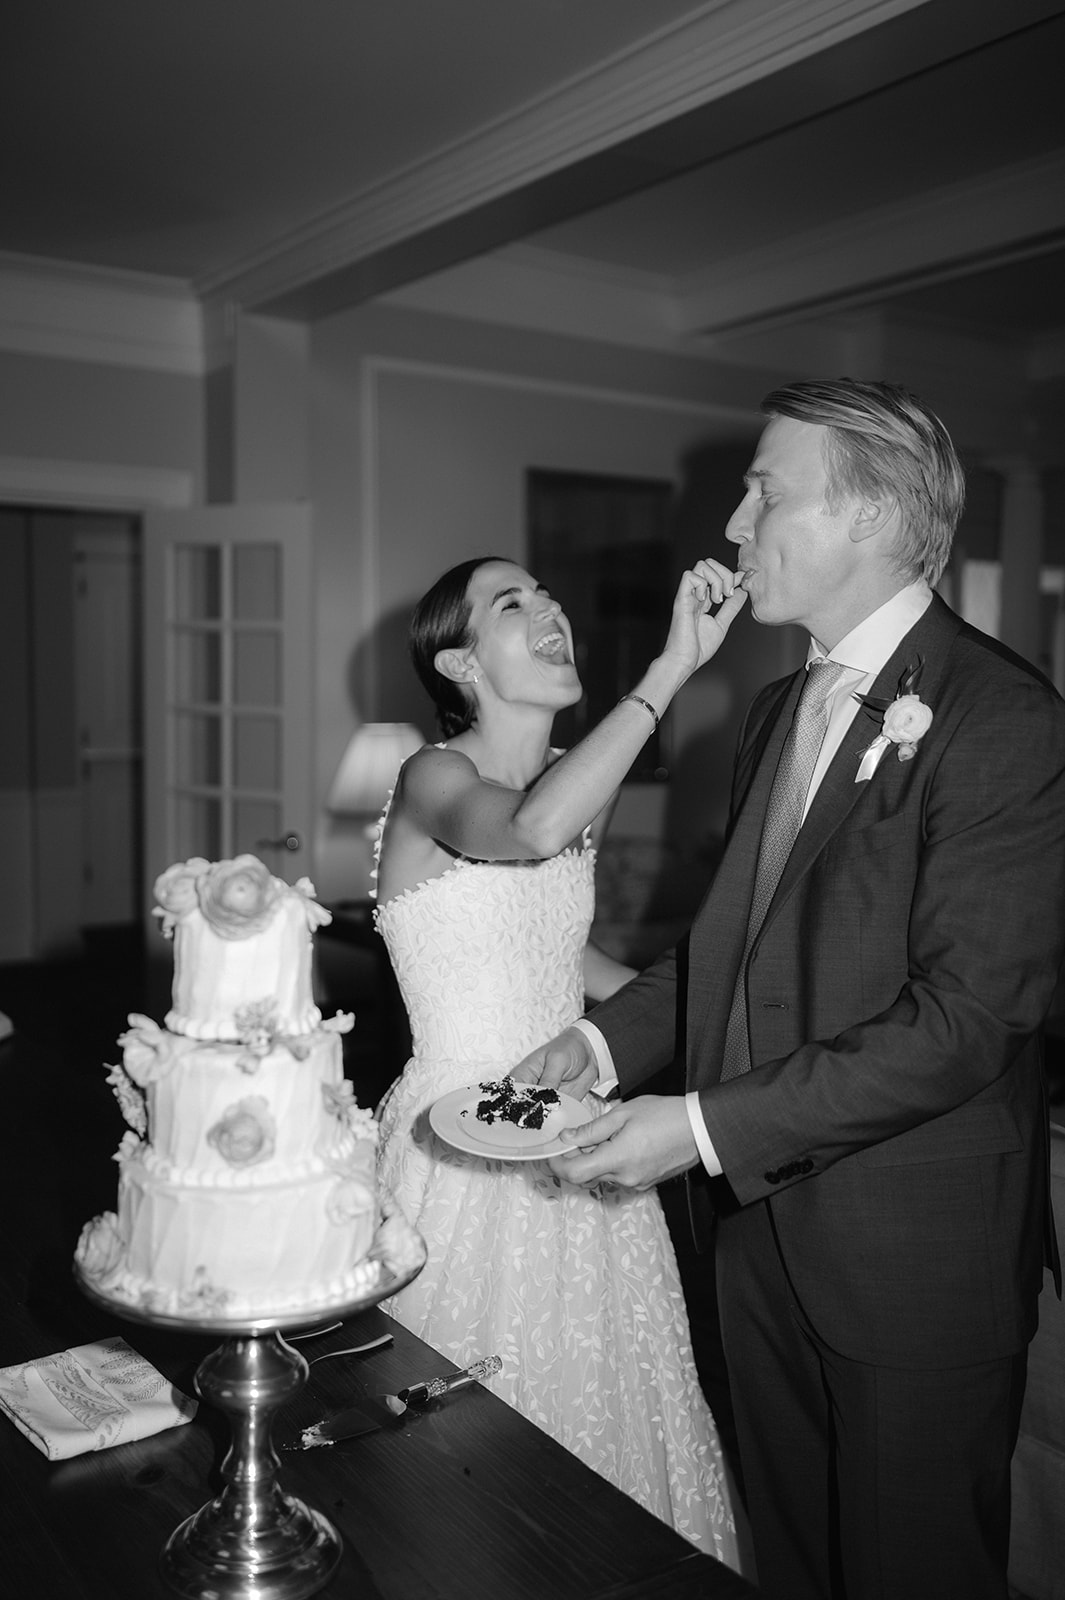 Black and white bride and groom cake cutting ceremony. 